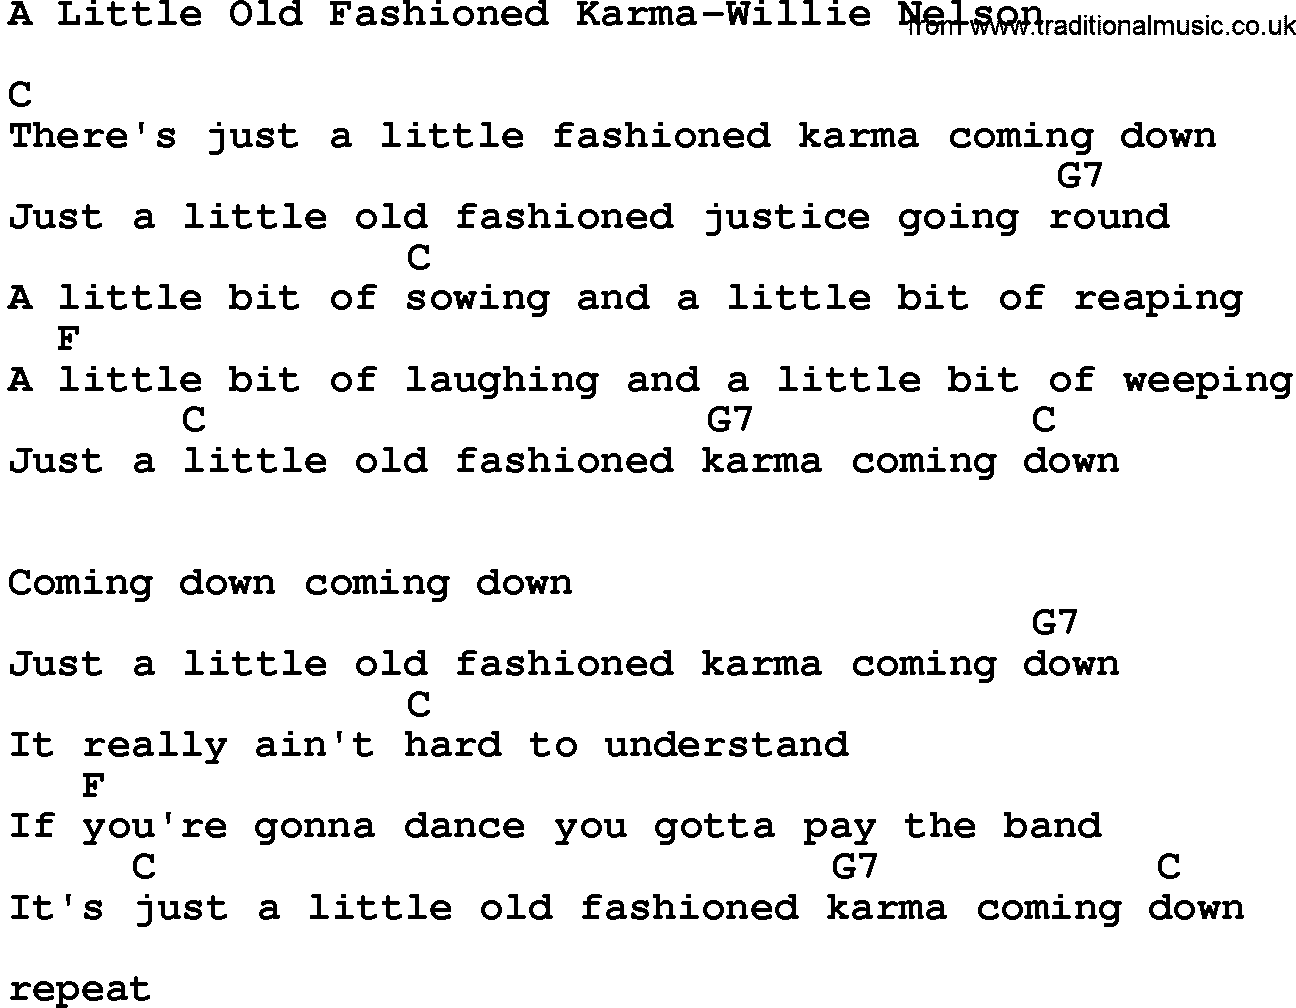 Country music song: A Little Old Fashioned Karma-Willie Nelson lyrics and chords